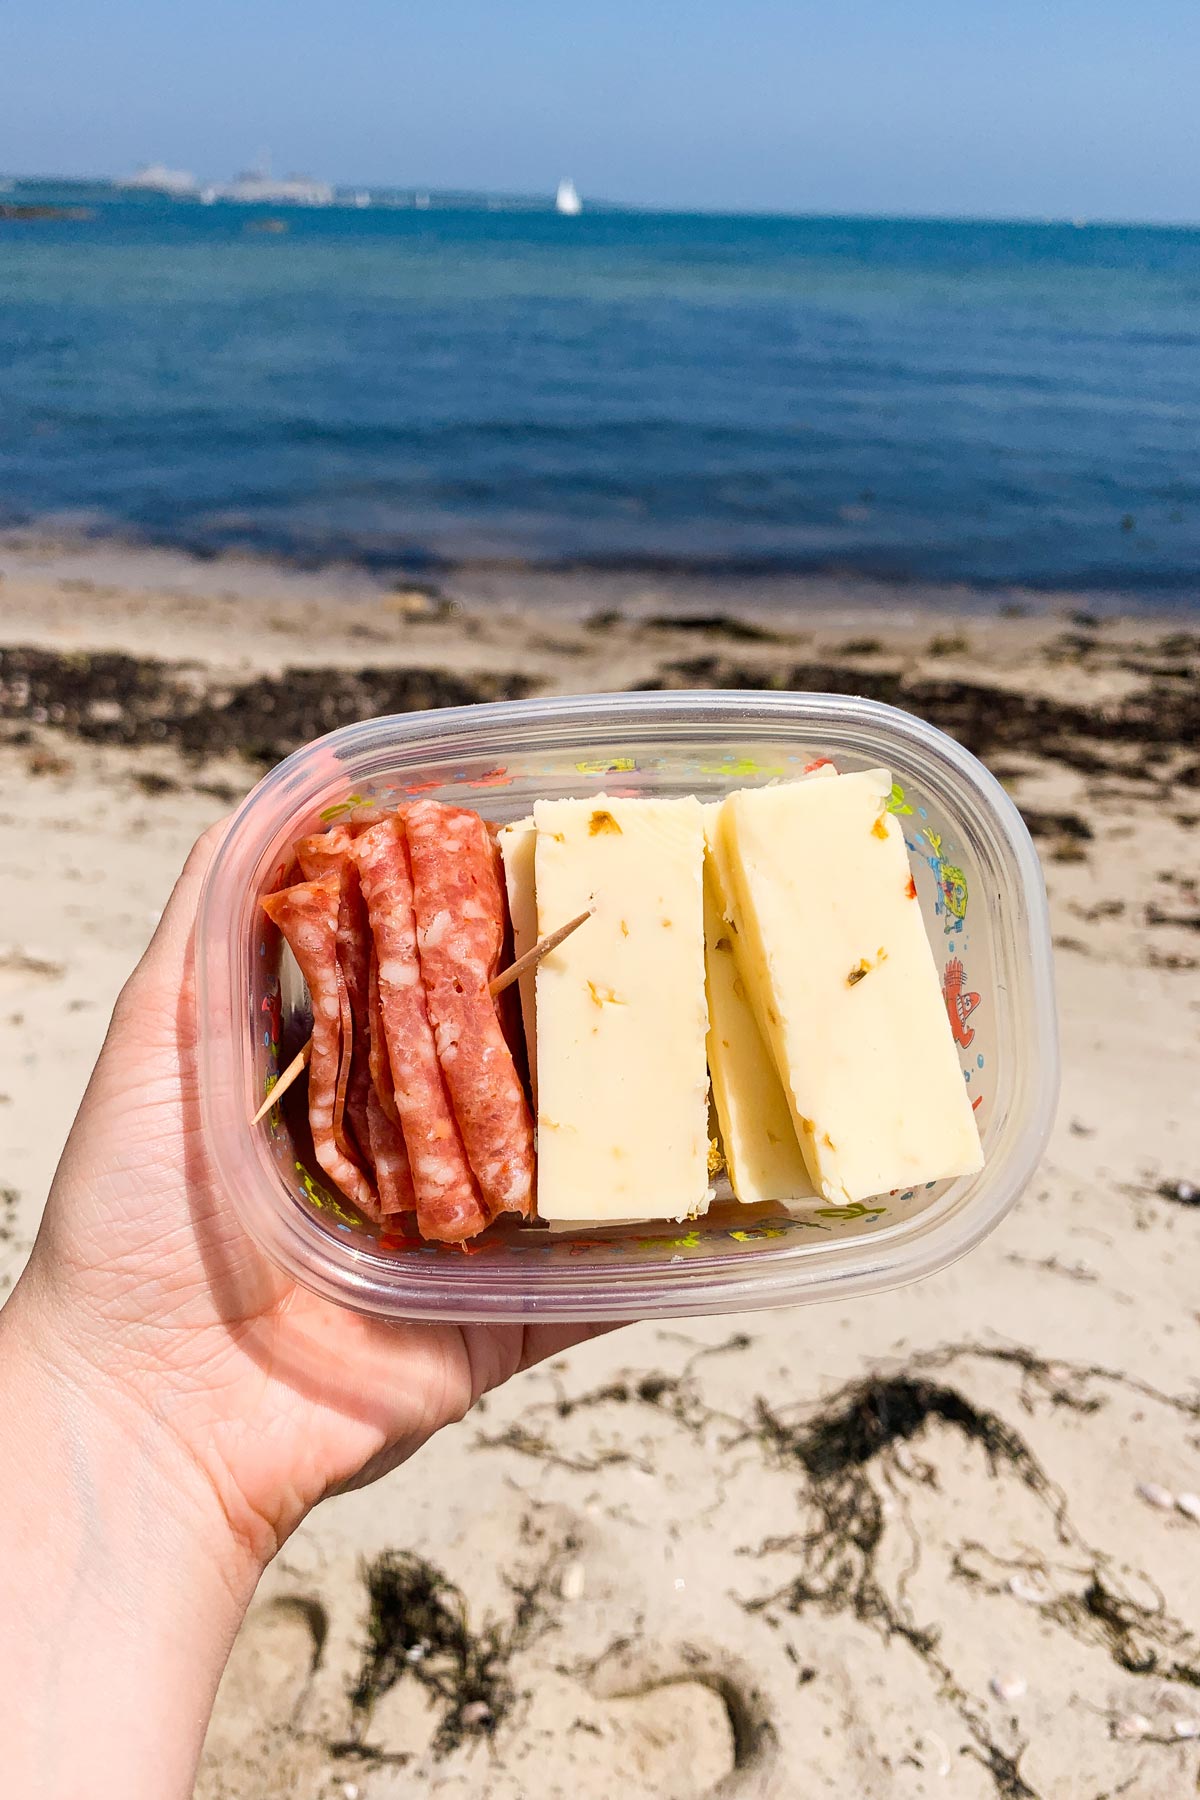 slices of salami and cheese in a container on the beach